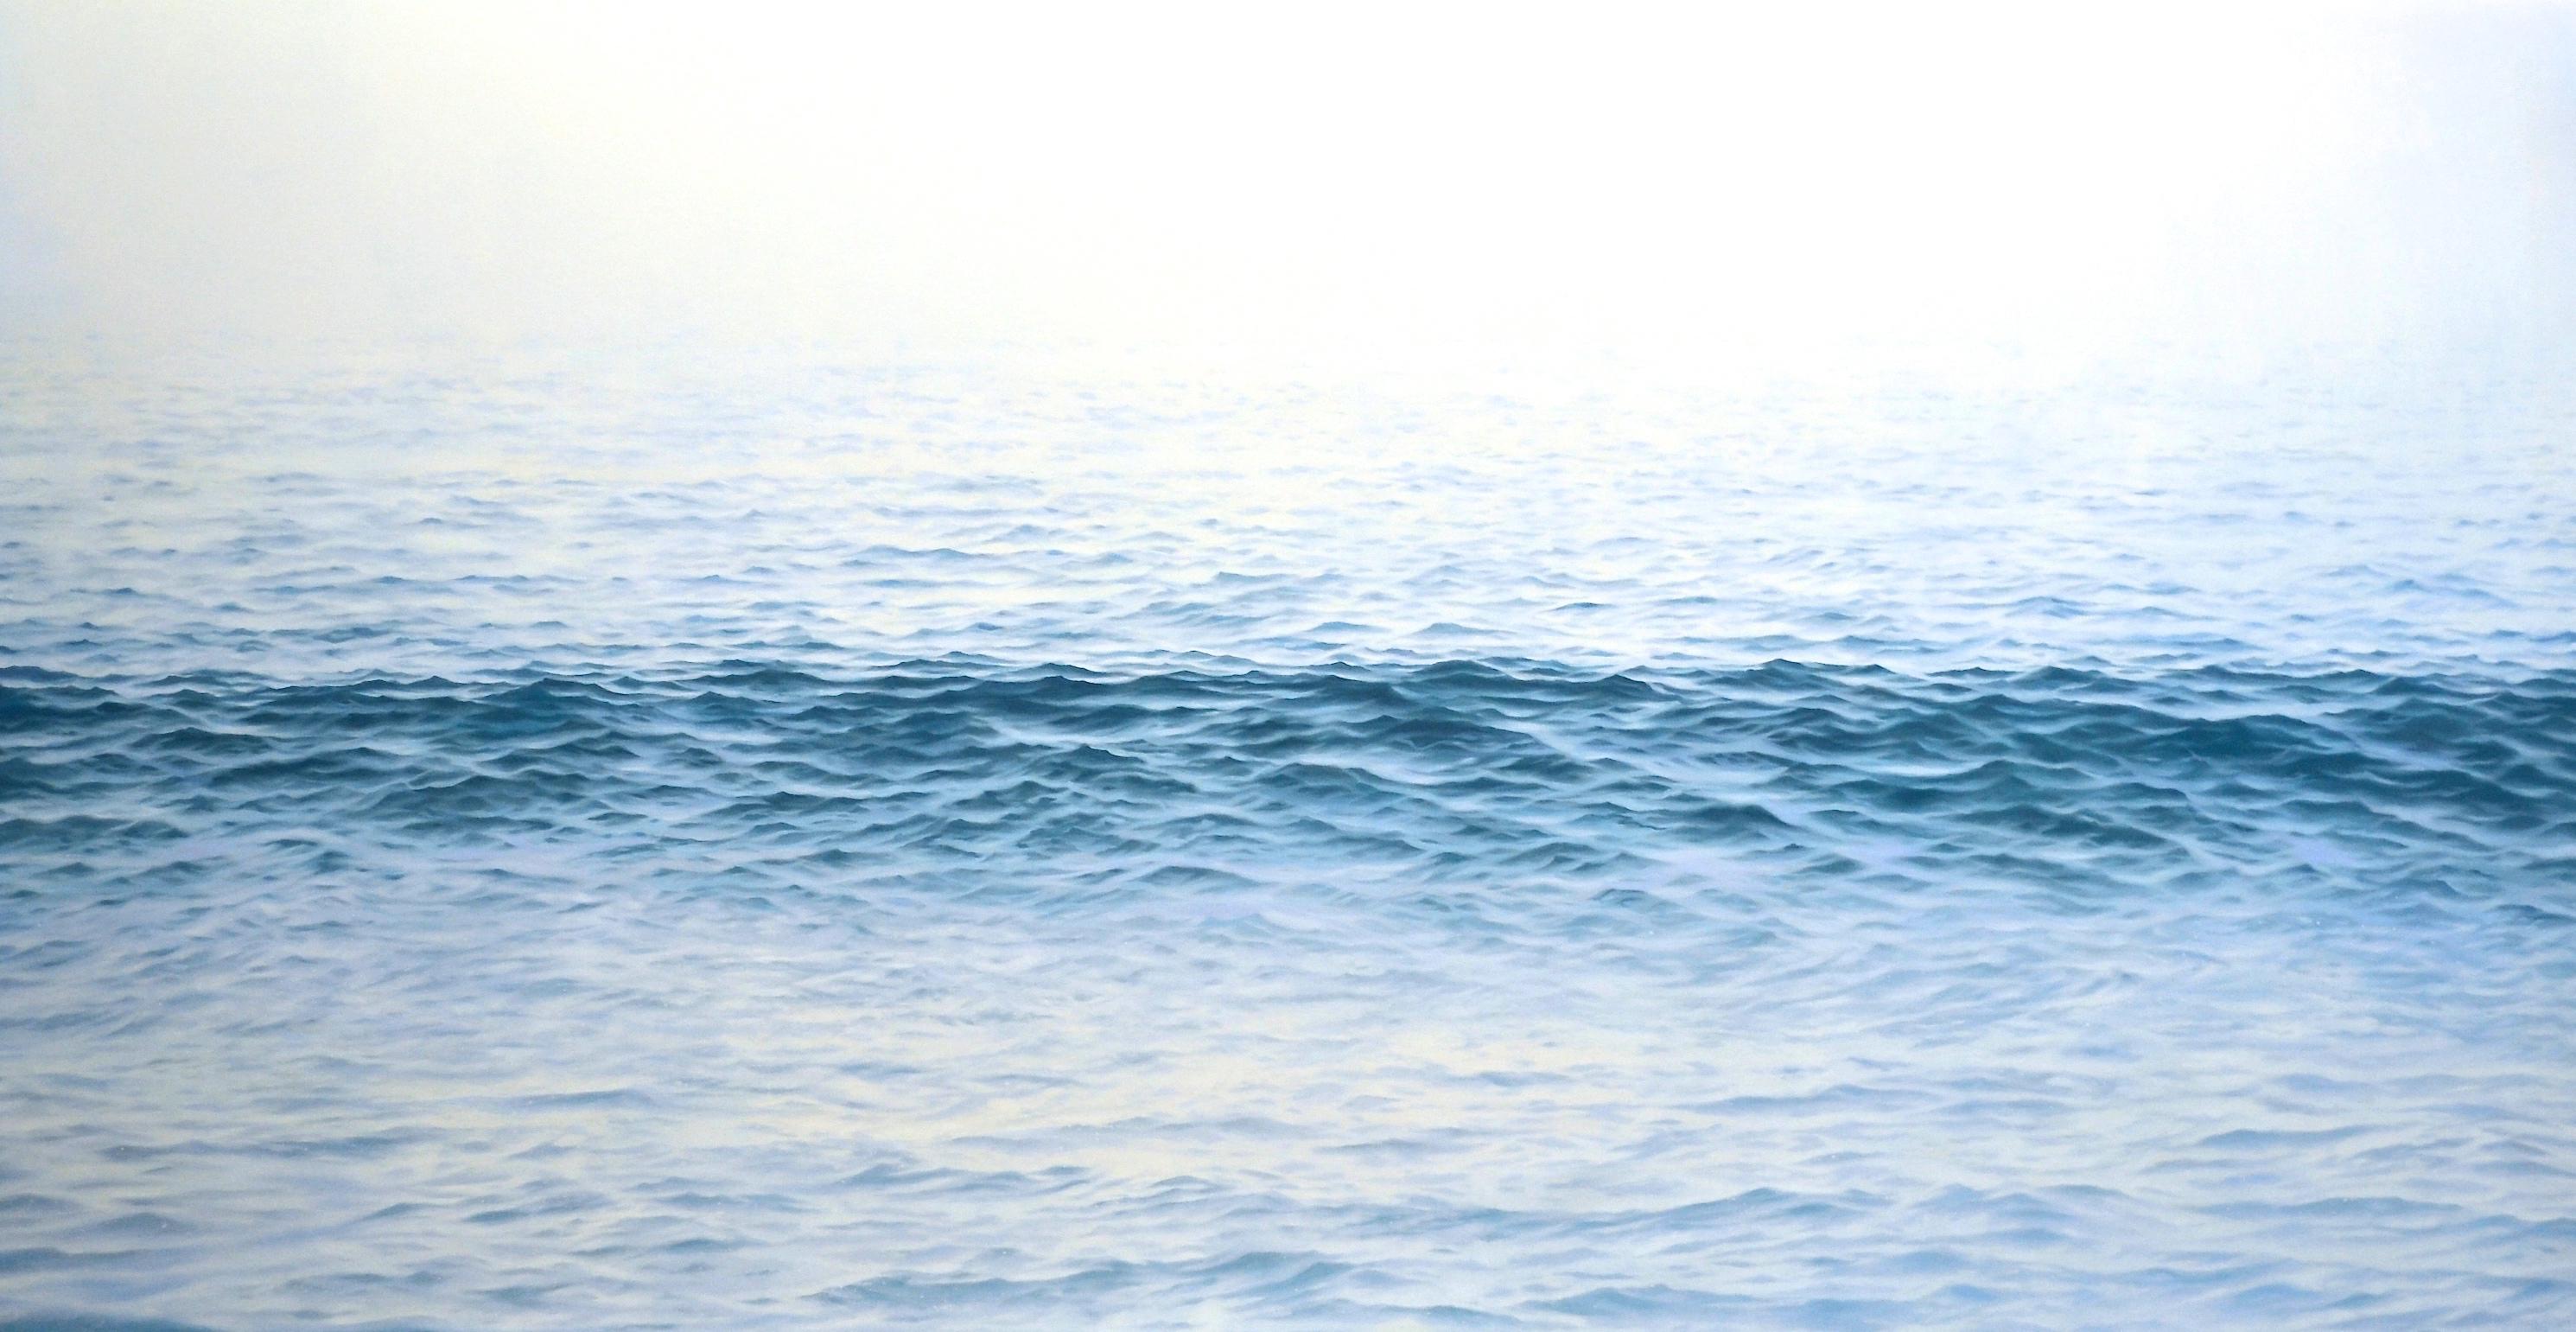 Chris Armstrong Landscape Painting - "Traverse, Highly Realistic Large Water (Ocean) Painting in Blue and White"